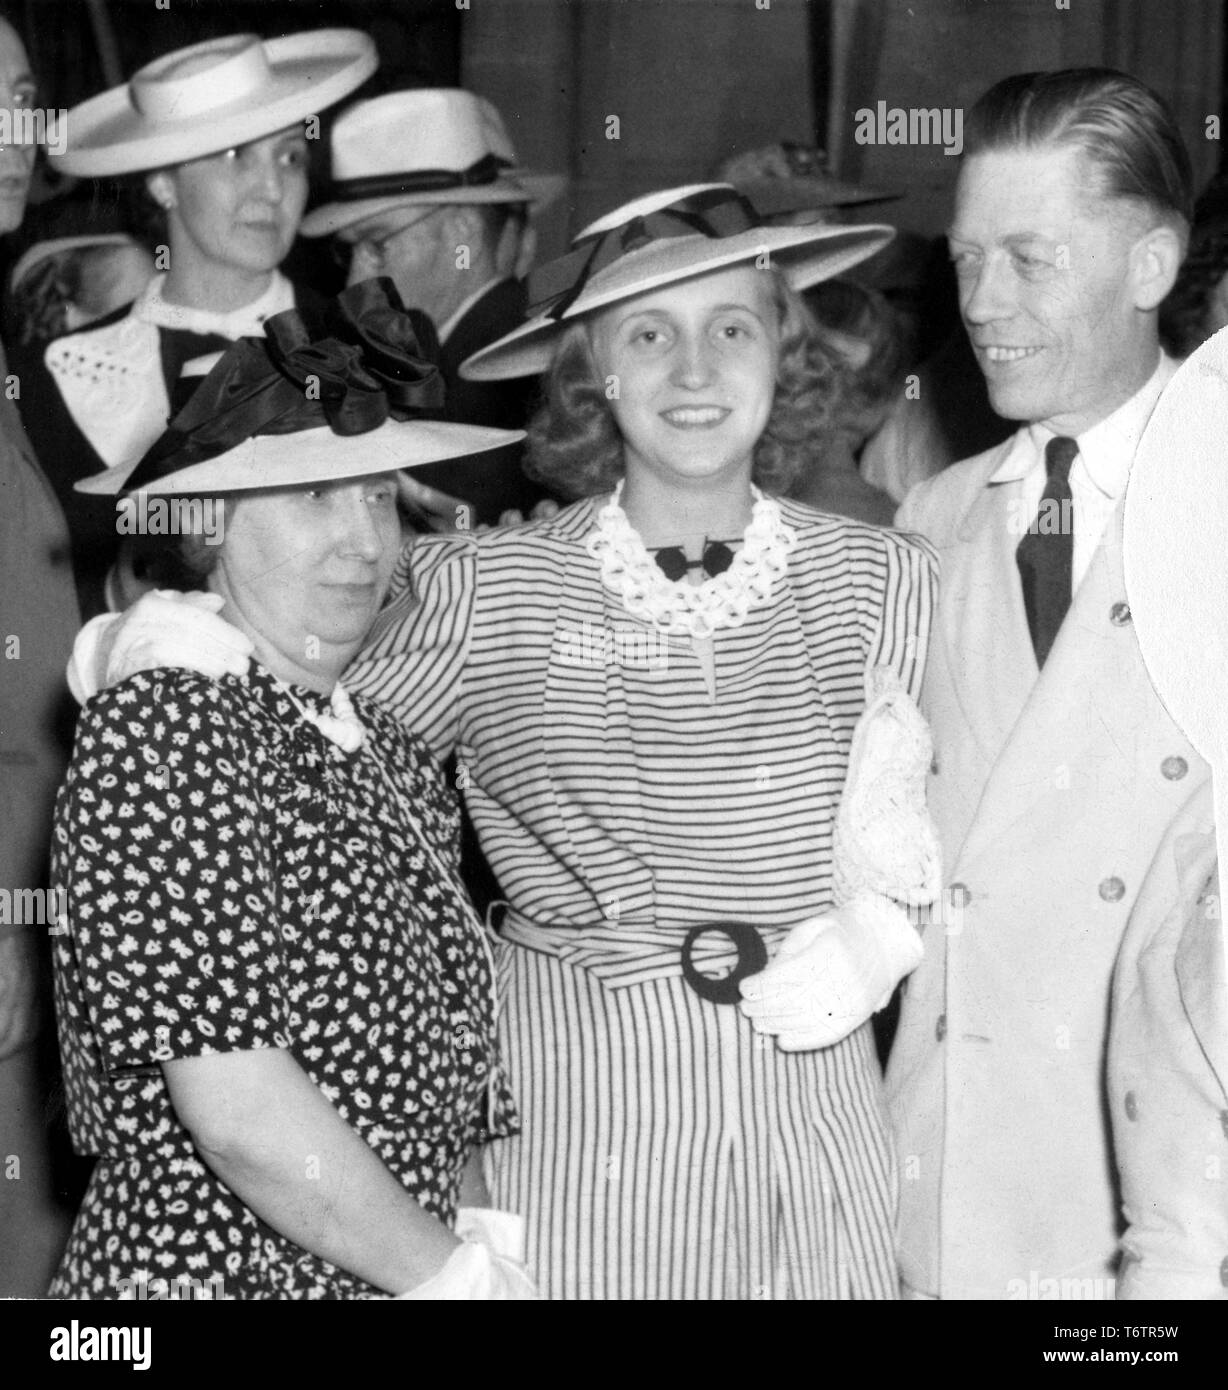 First Lady Bess Truman, her daughter Margaret Truman, and campaign manager Victor Messall, from the waist up, posing together at a 1940 reelection campaign rally for President Harry Truman, Sedalia, Missouri, 1940. Image courtesy National Archives. () Stock Photo